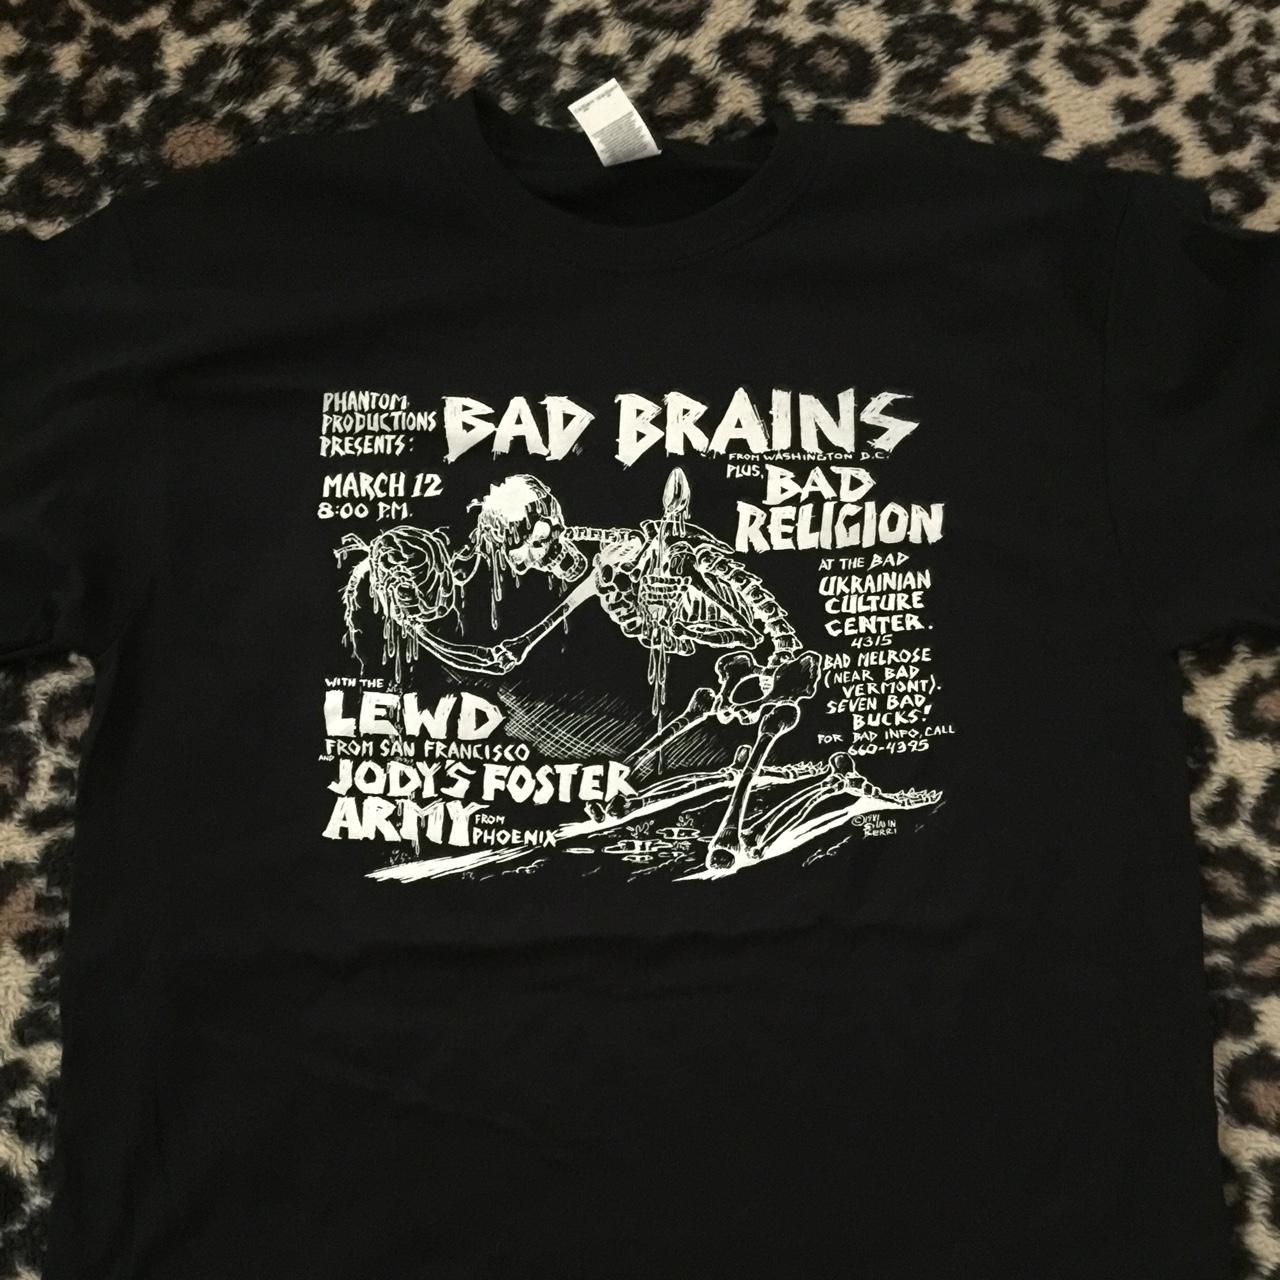 Bad Brains flyer tee. Art work from show in Los